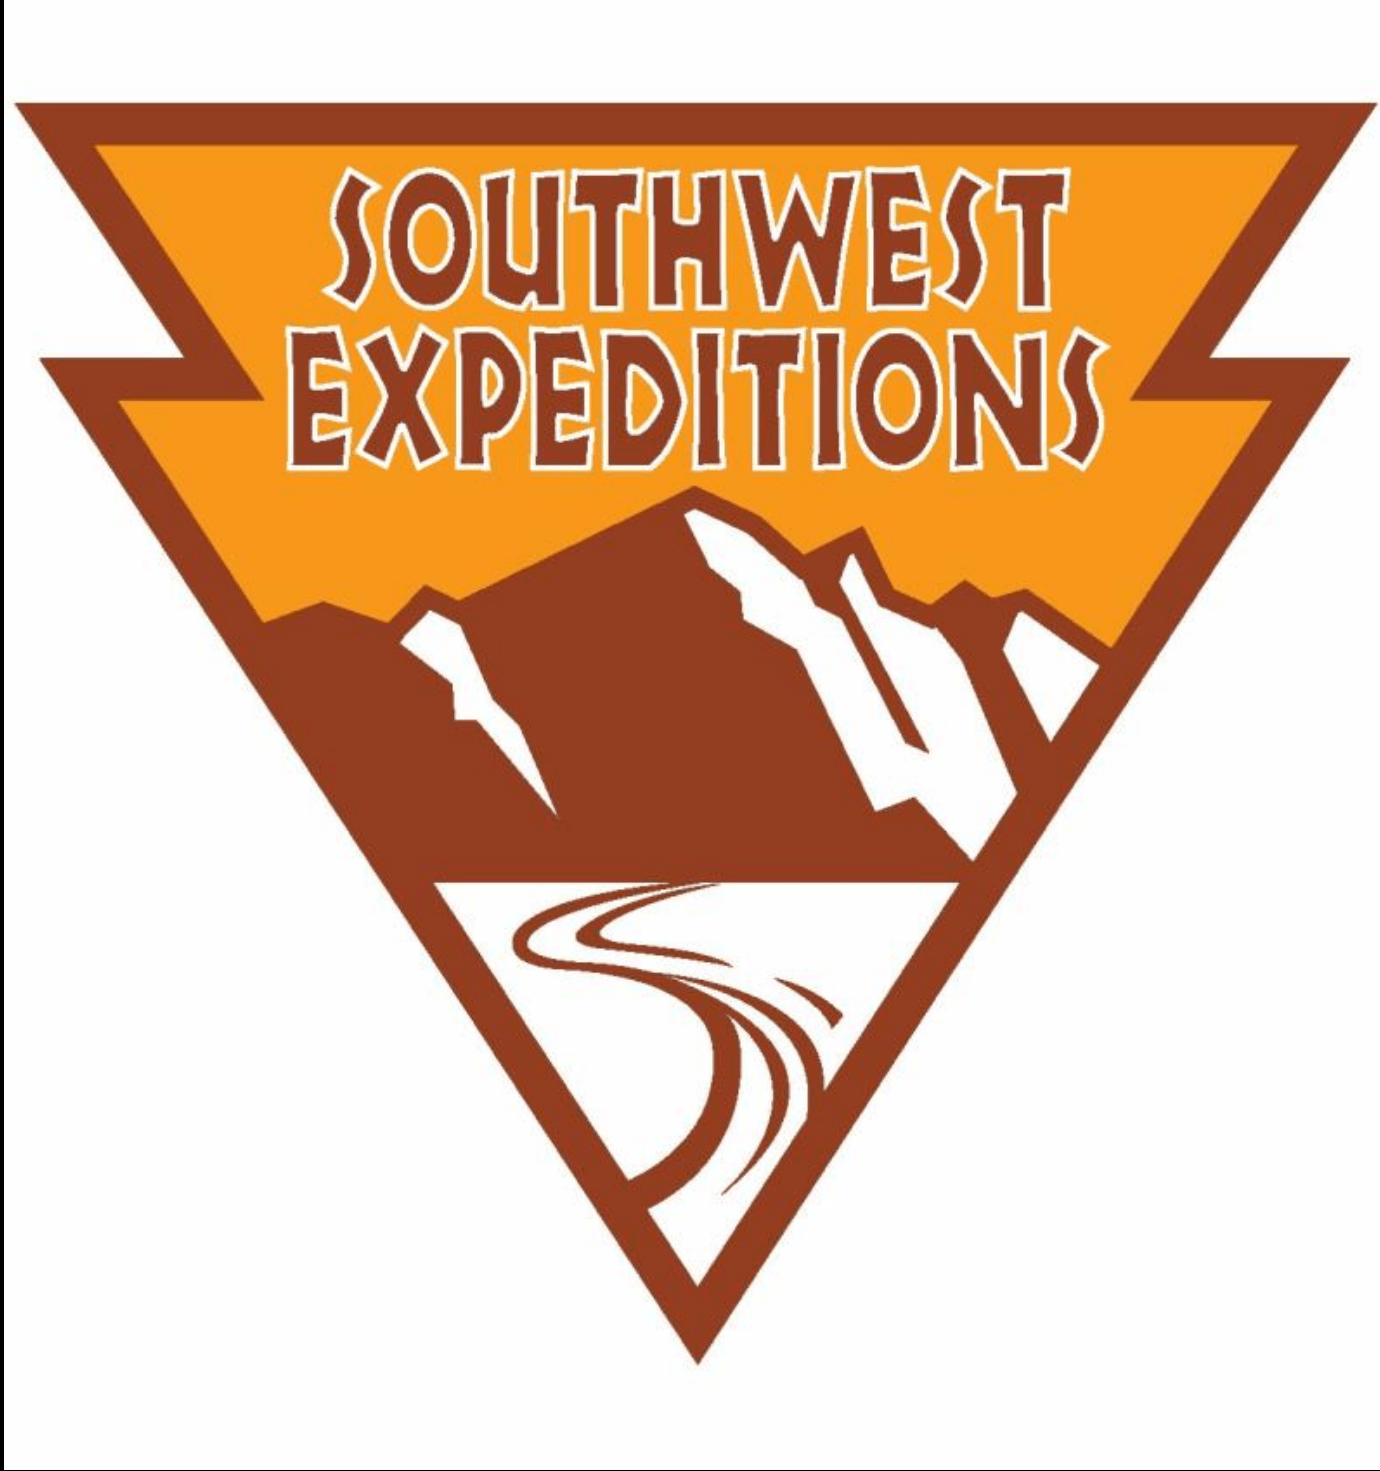 SOUTHWEST EXPEDITIONS